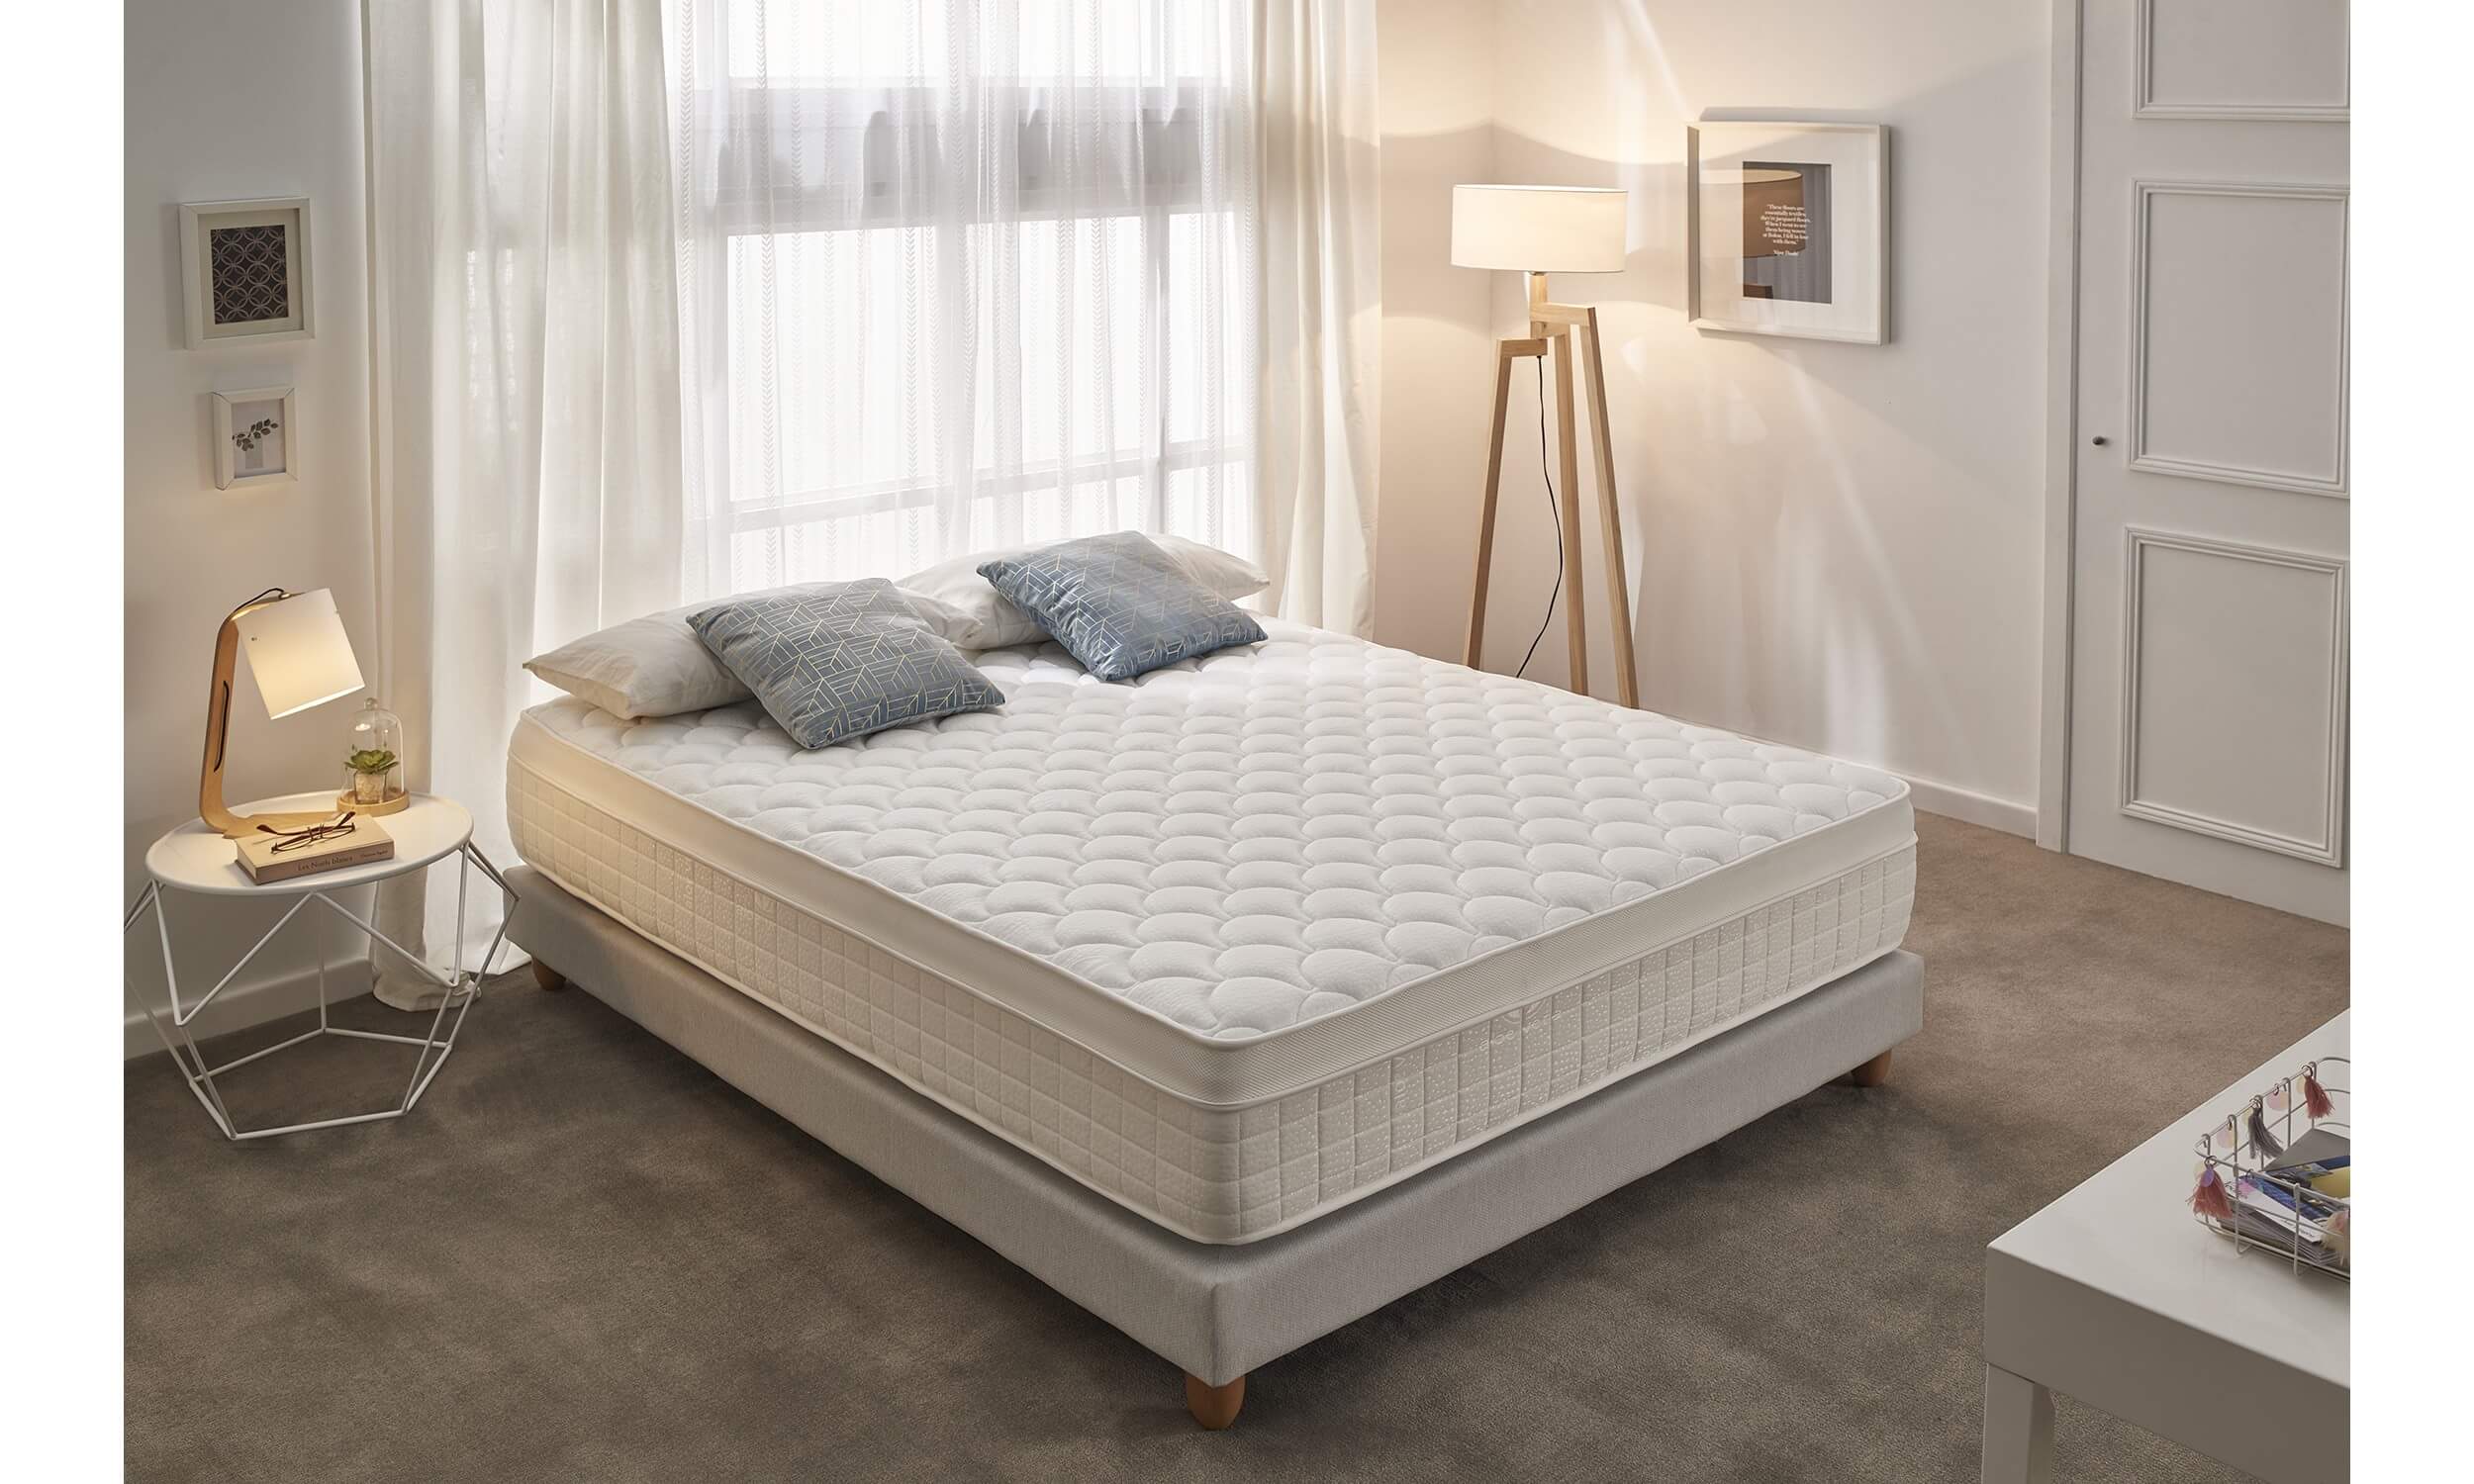 can you disassemble a box spring mattress